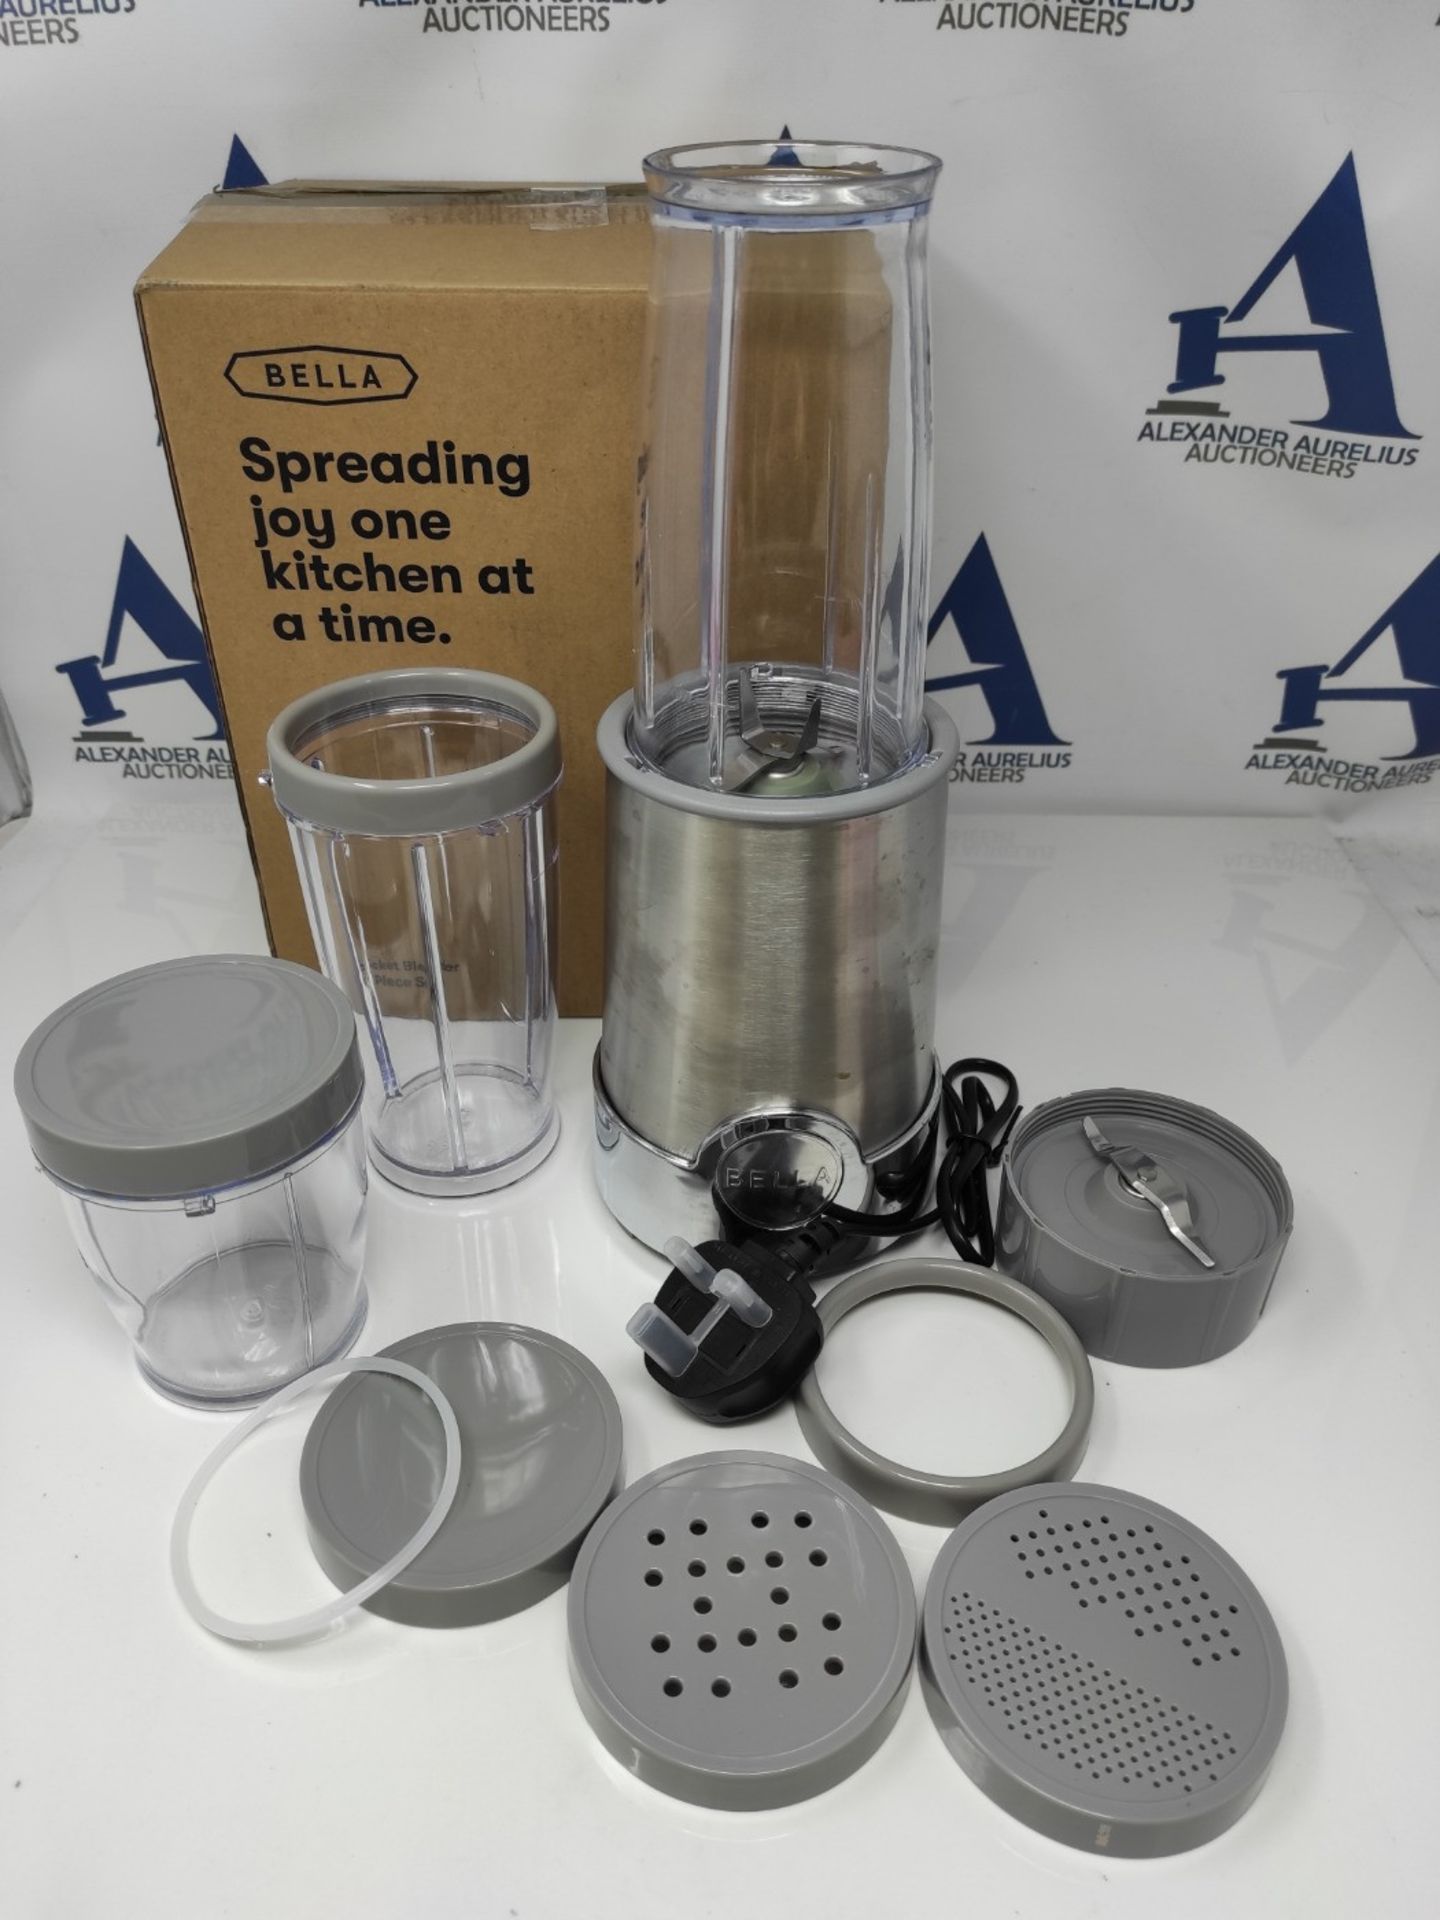 BELLA Personal Size Rocket Blender, Optimal for Smoothies, Shakes and Healthy Drinks, - Image 2 of 2